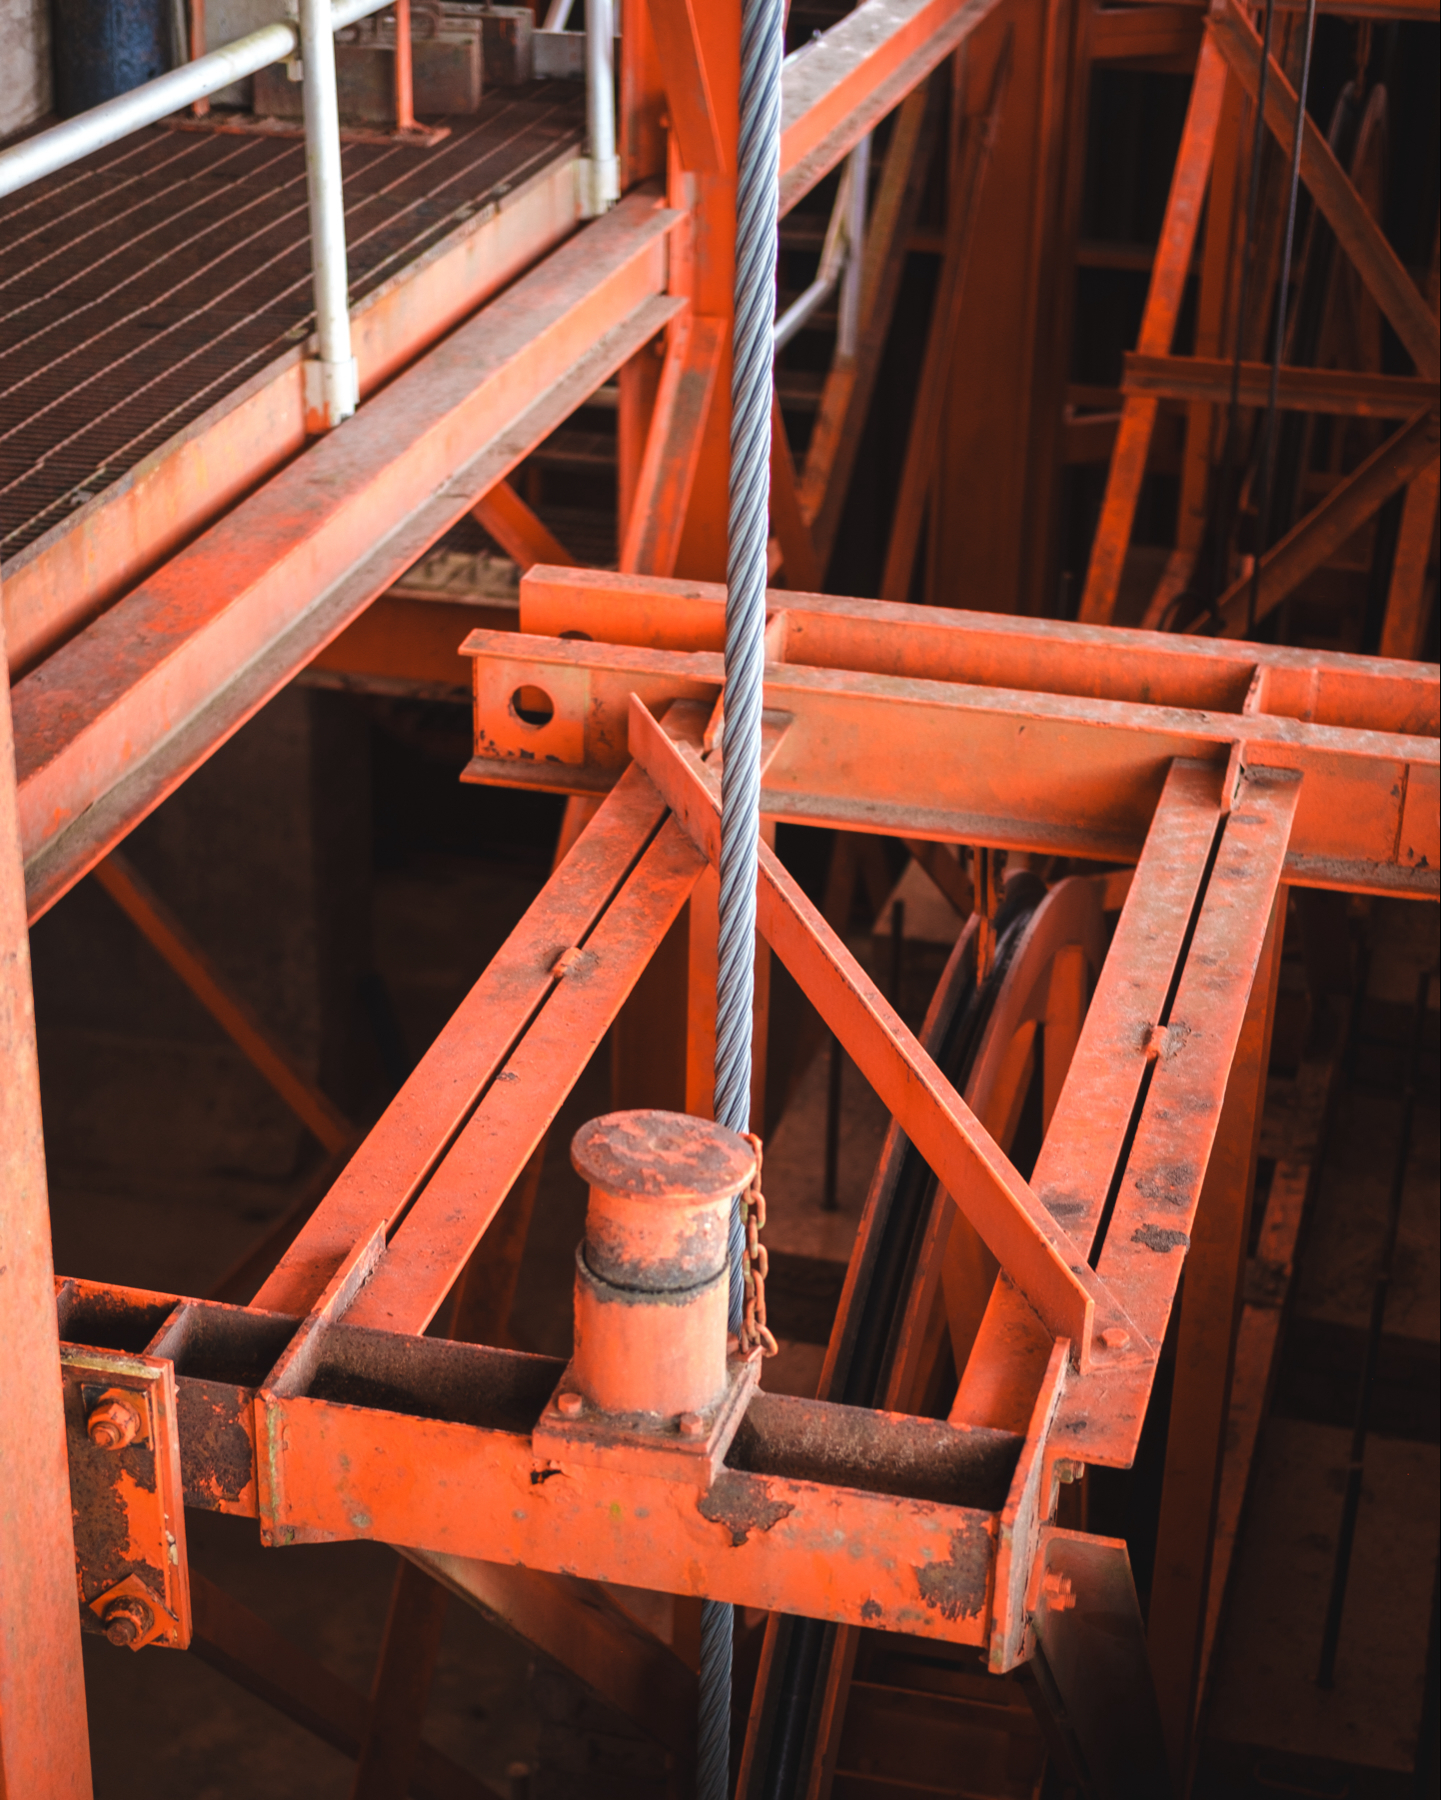 Industrial crane pulley with a thick steel cable, set against a backdrop of orange metal construction with visible rust and wear.